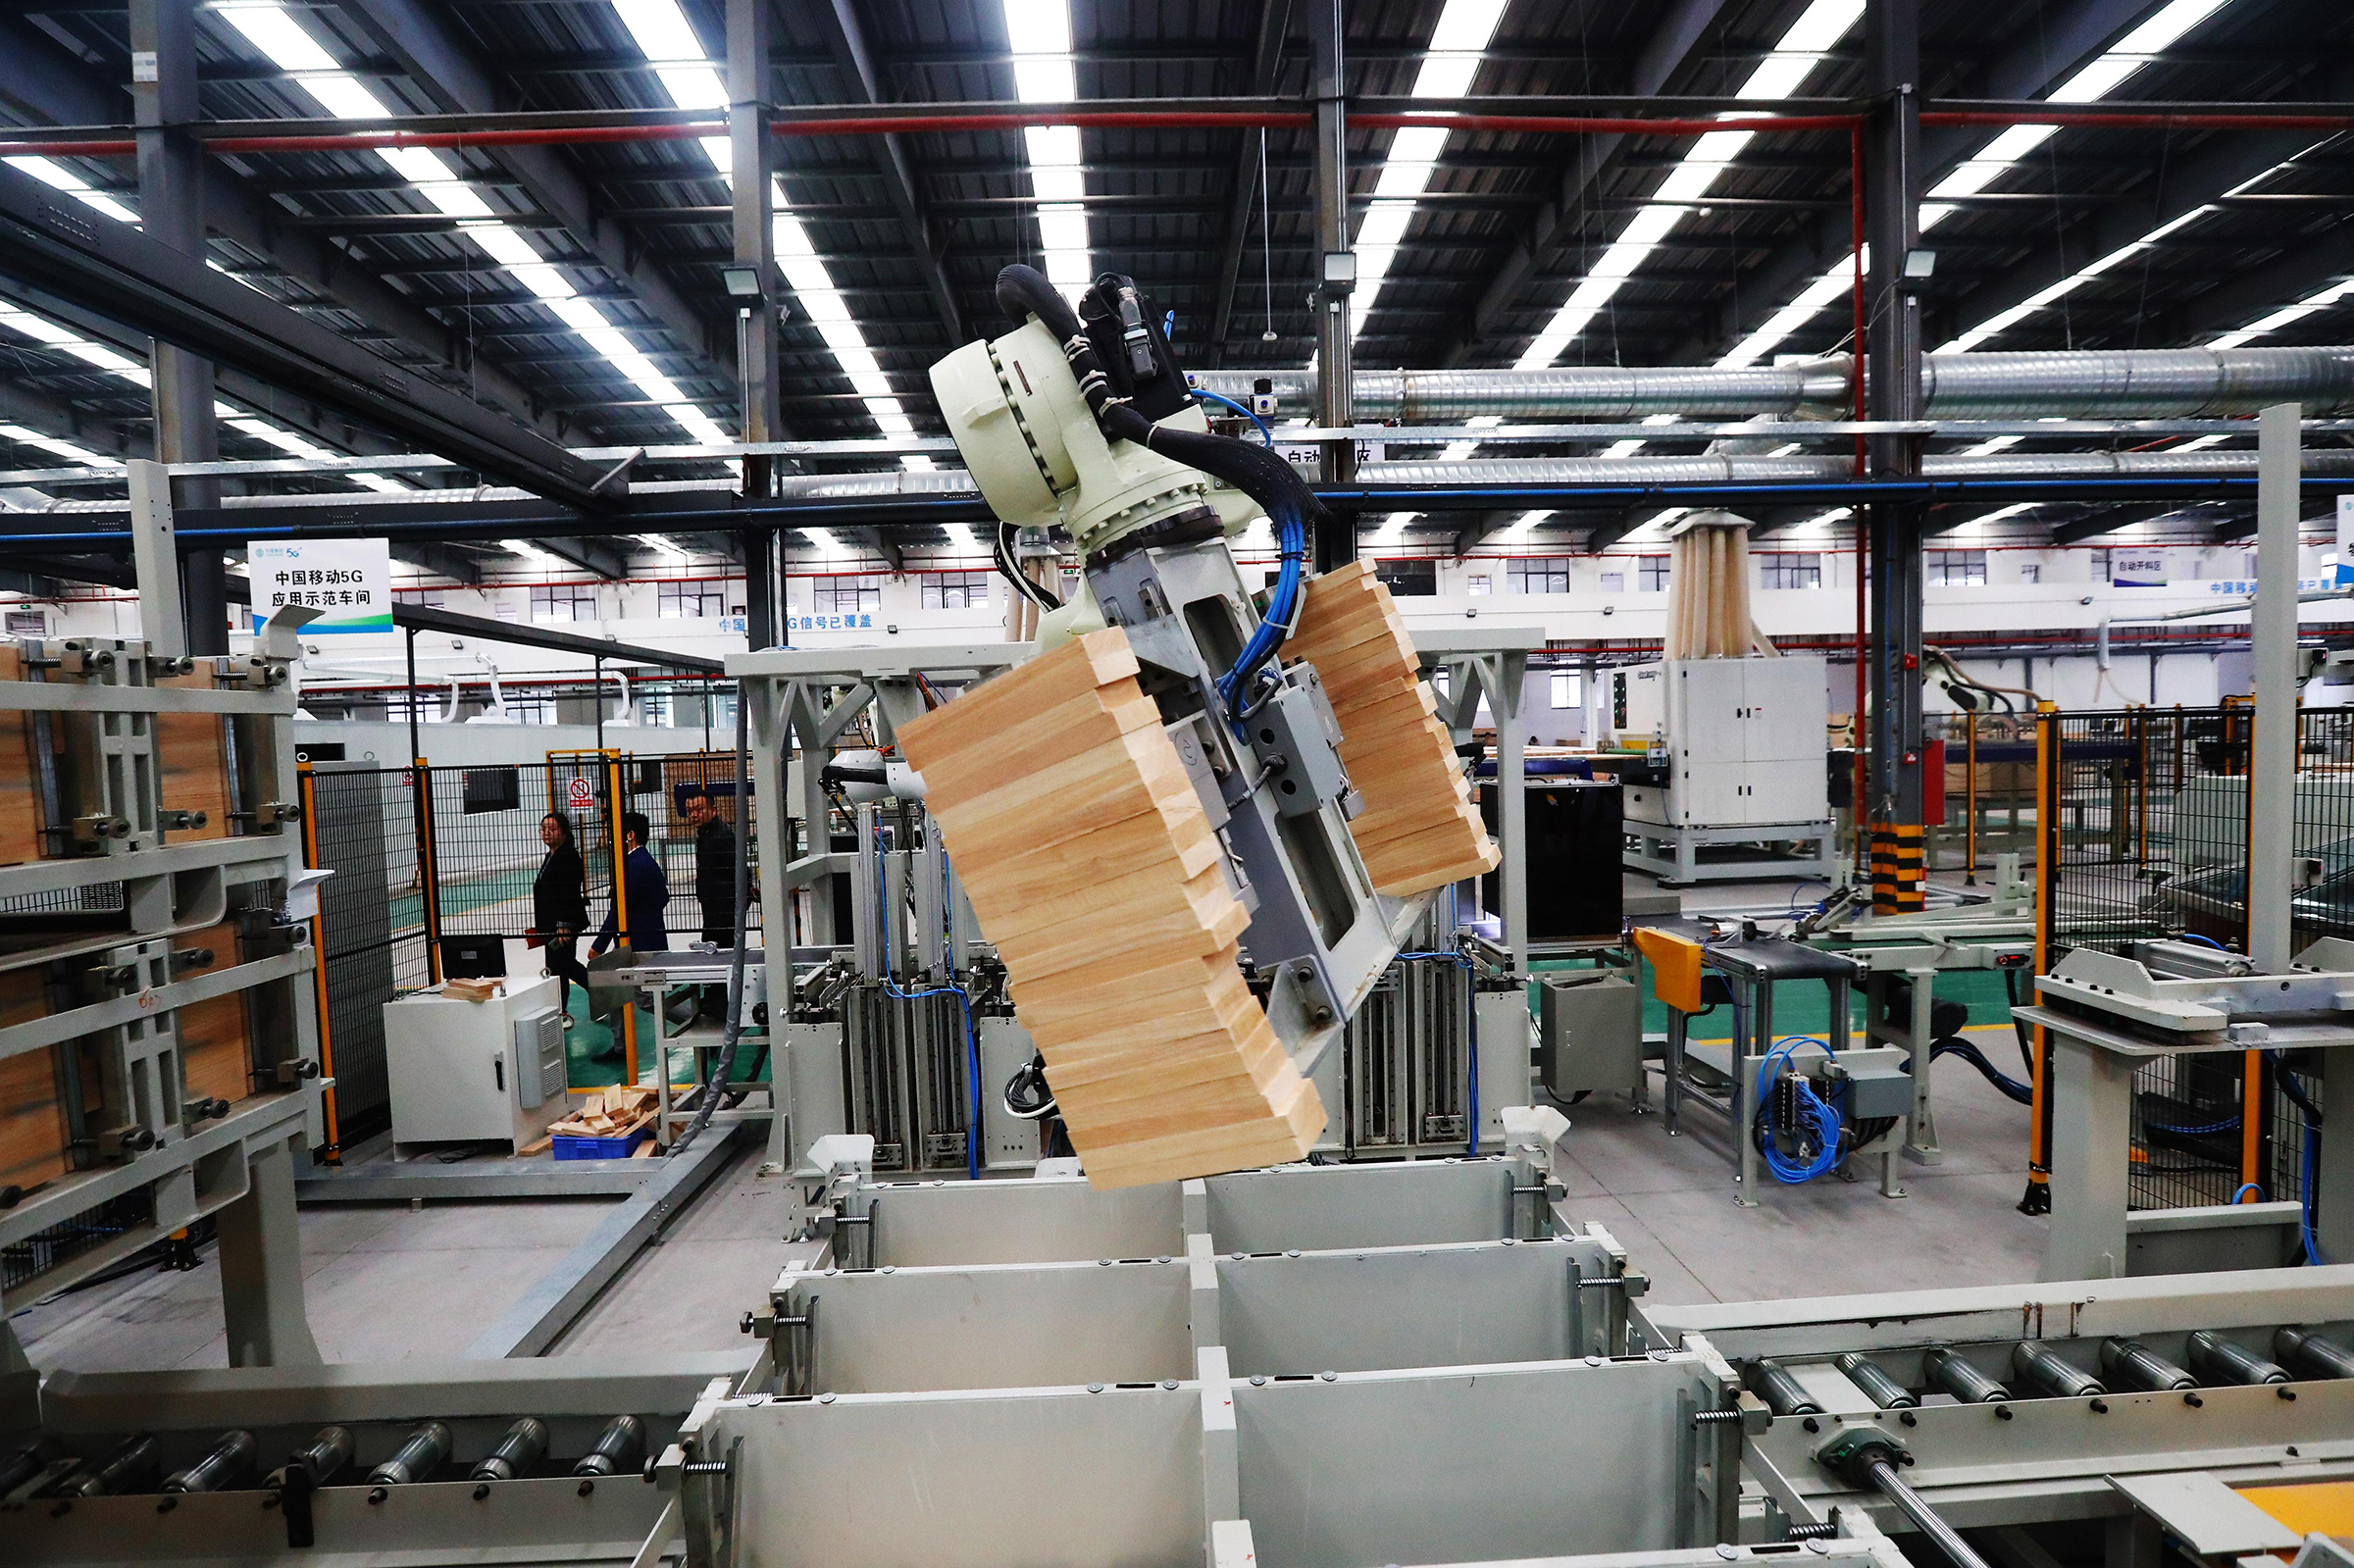 A robotic arm moves bricks using 5G and AI on Oct. 21 in Ganzhou, Jiangxi province (Liu Zhankun—China News Service/Getty Images)